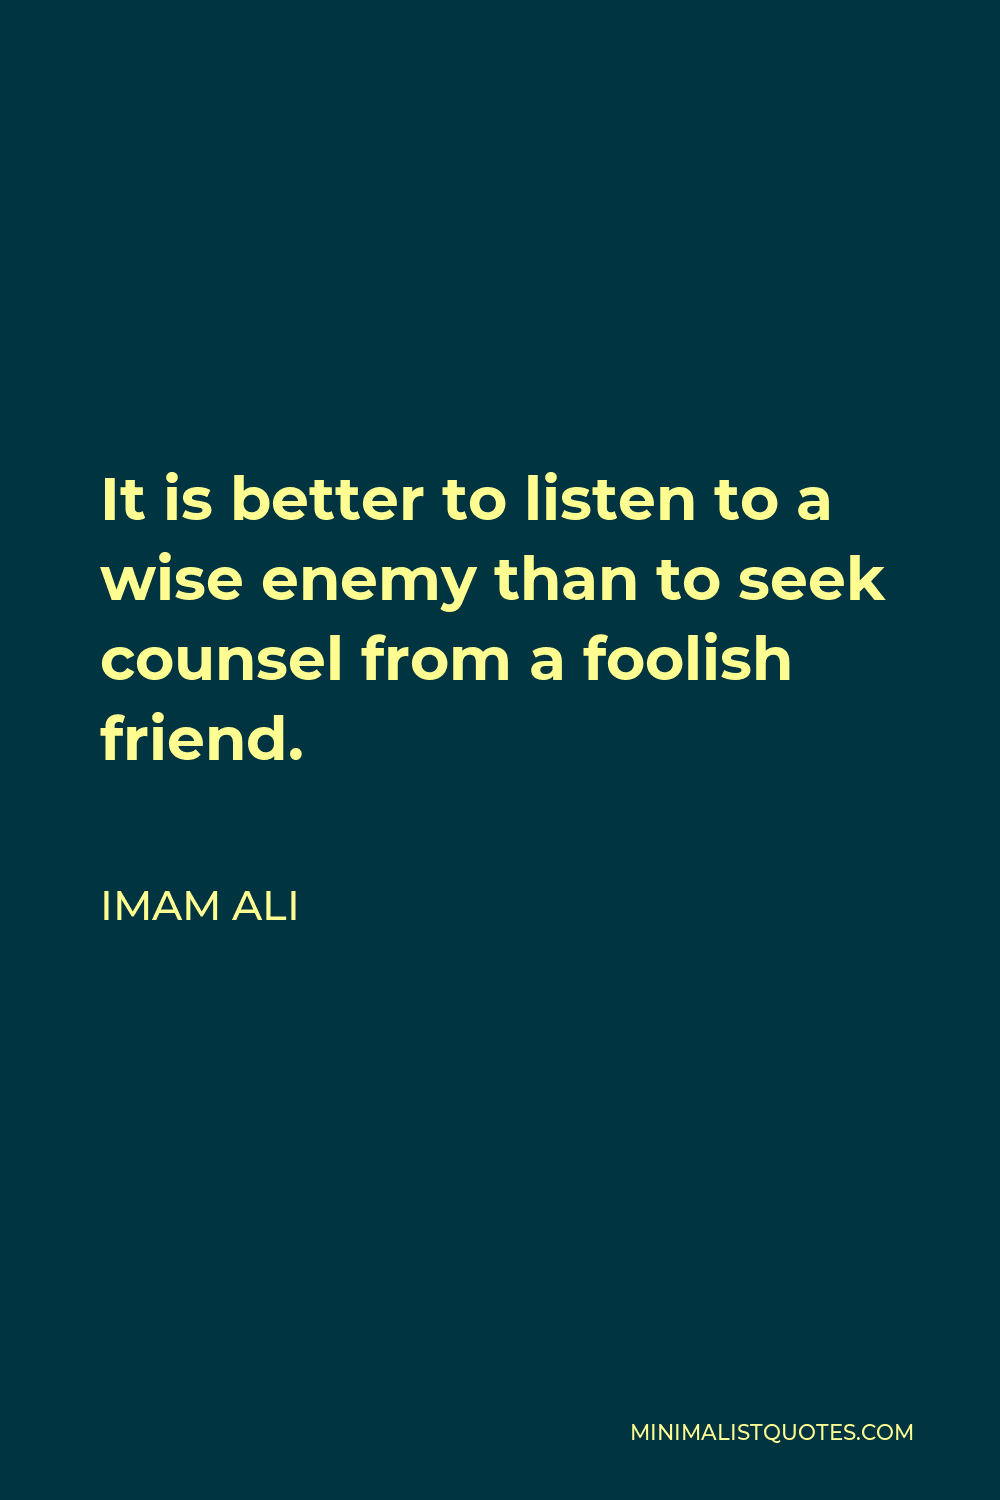 Imam Ali Quote - It is better to listen to a wise enemy than to seek counsel from a foolish friend.